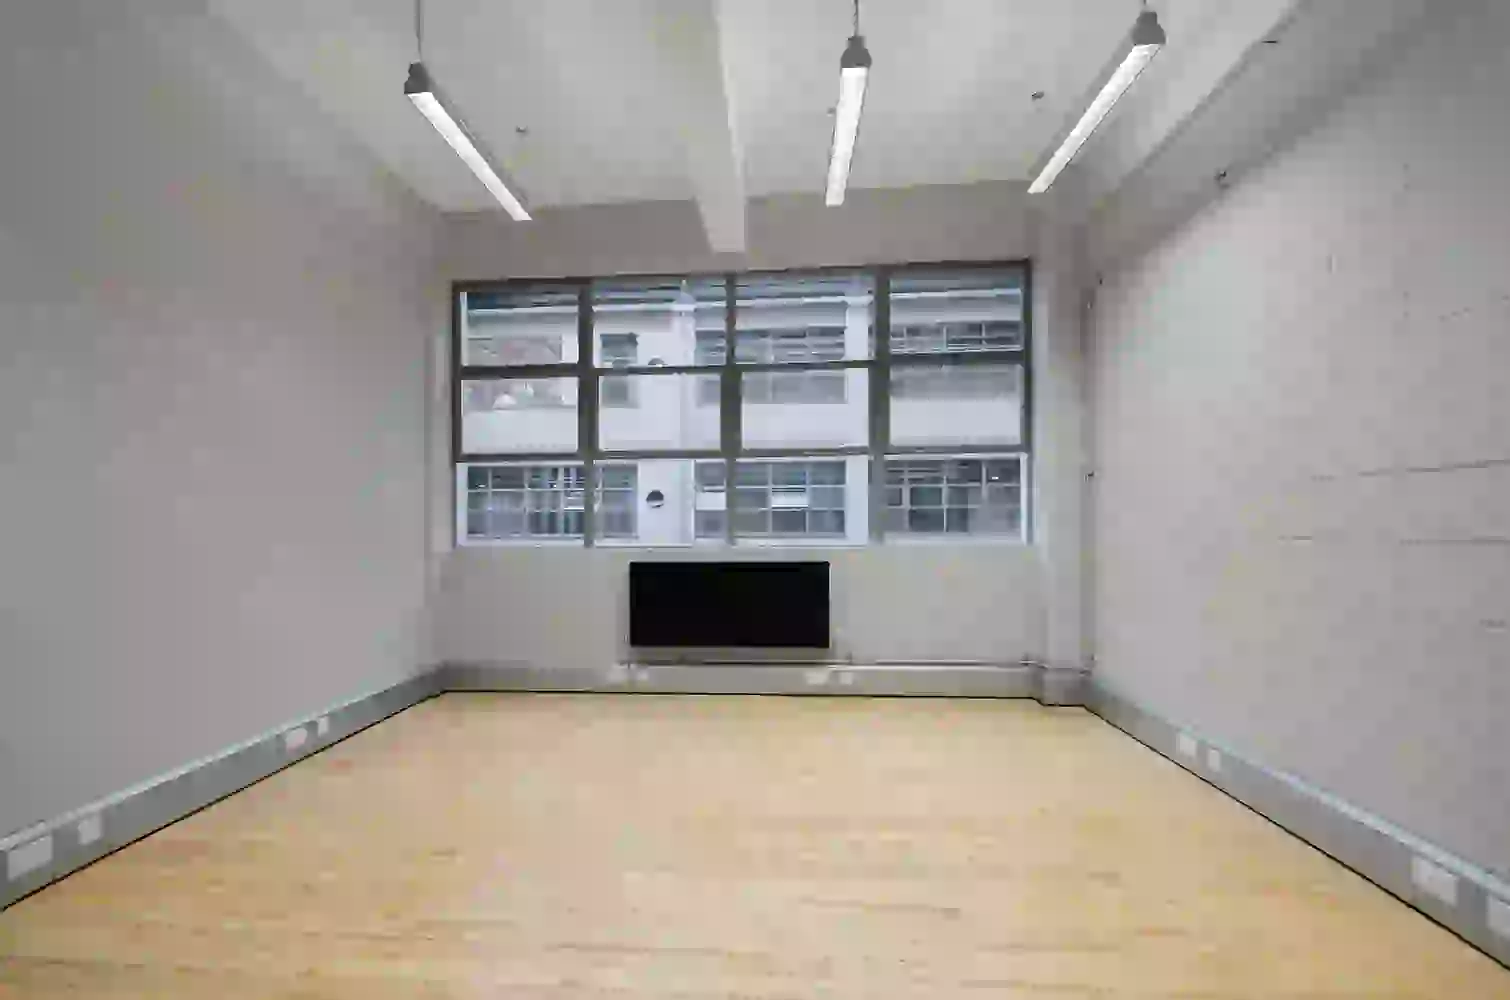 Office space to rent at Metal Box Factory, 30 Great Guildford Street, Borough, London, unit GG.221, 262 sq ft (24 sq m).